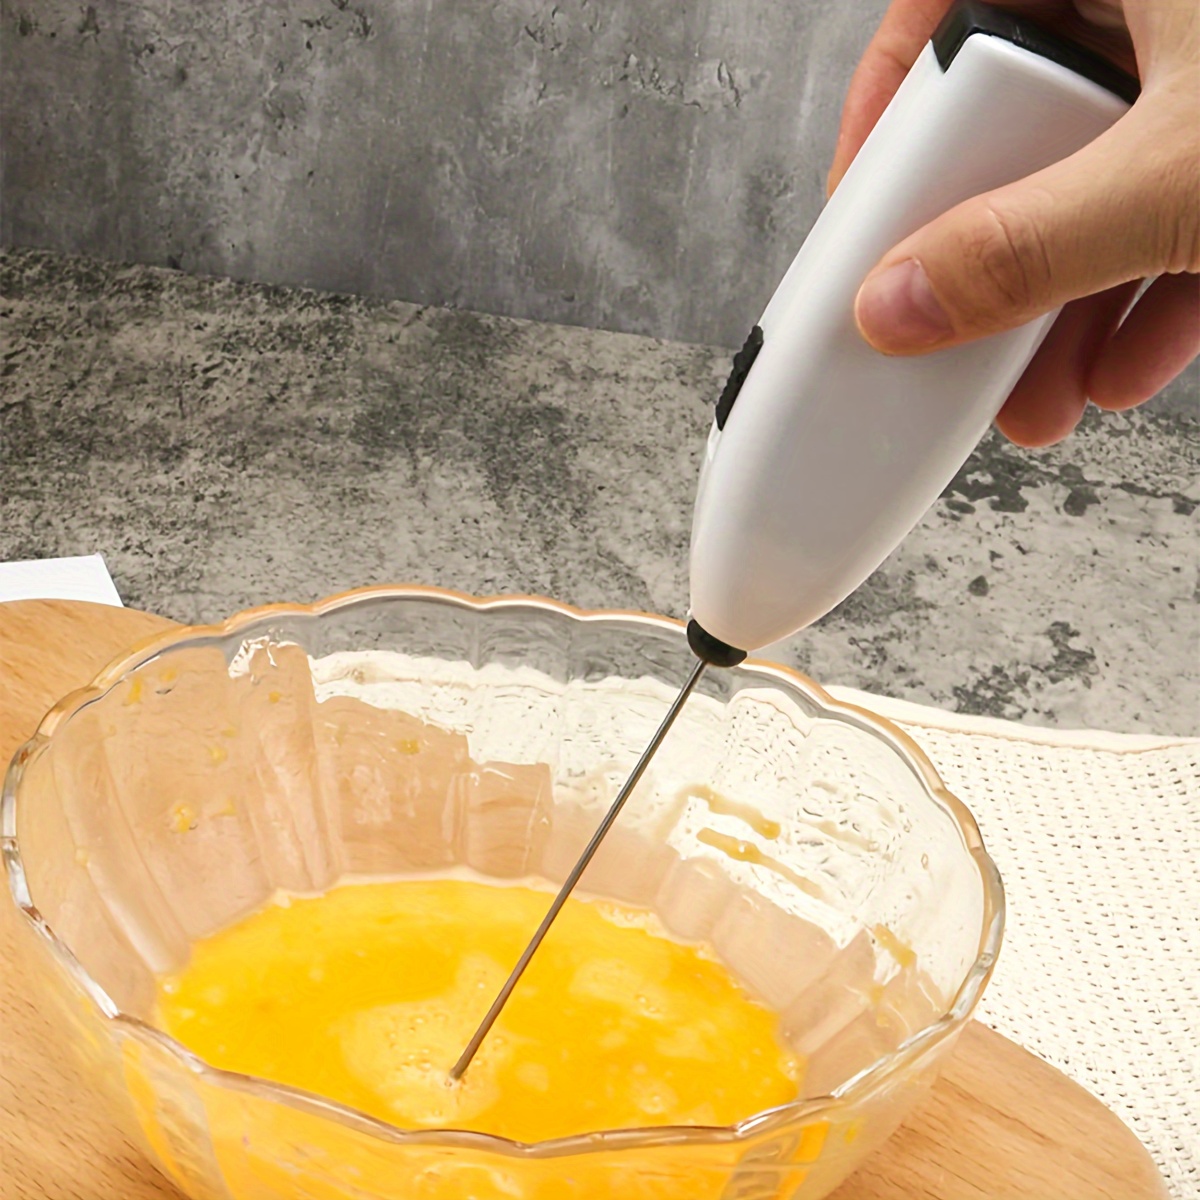 Potato Masher Handheld Automatic Mixer Coffee Hand Boiler MINI Household  Cordless Electric Hand Mixer USB Rechargable Handheld Egg Beater With 2